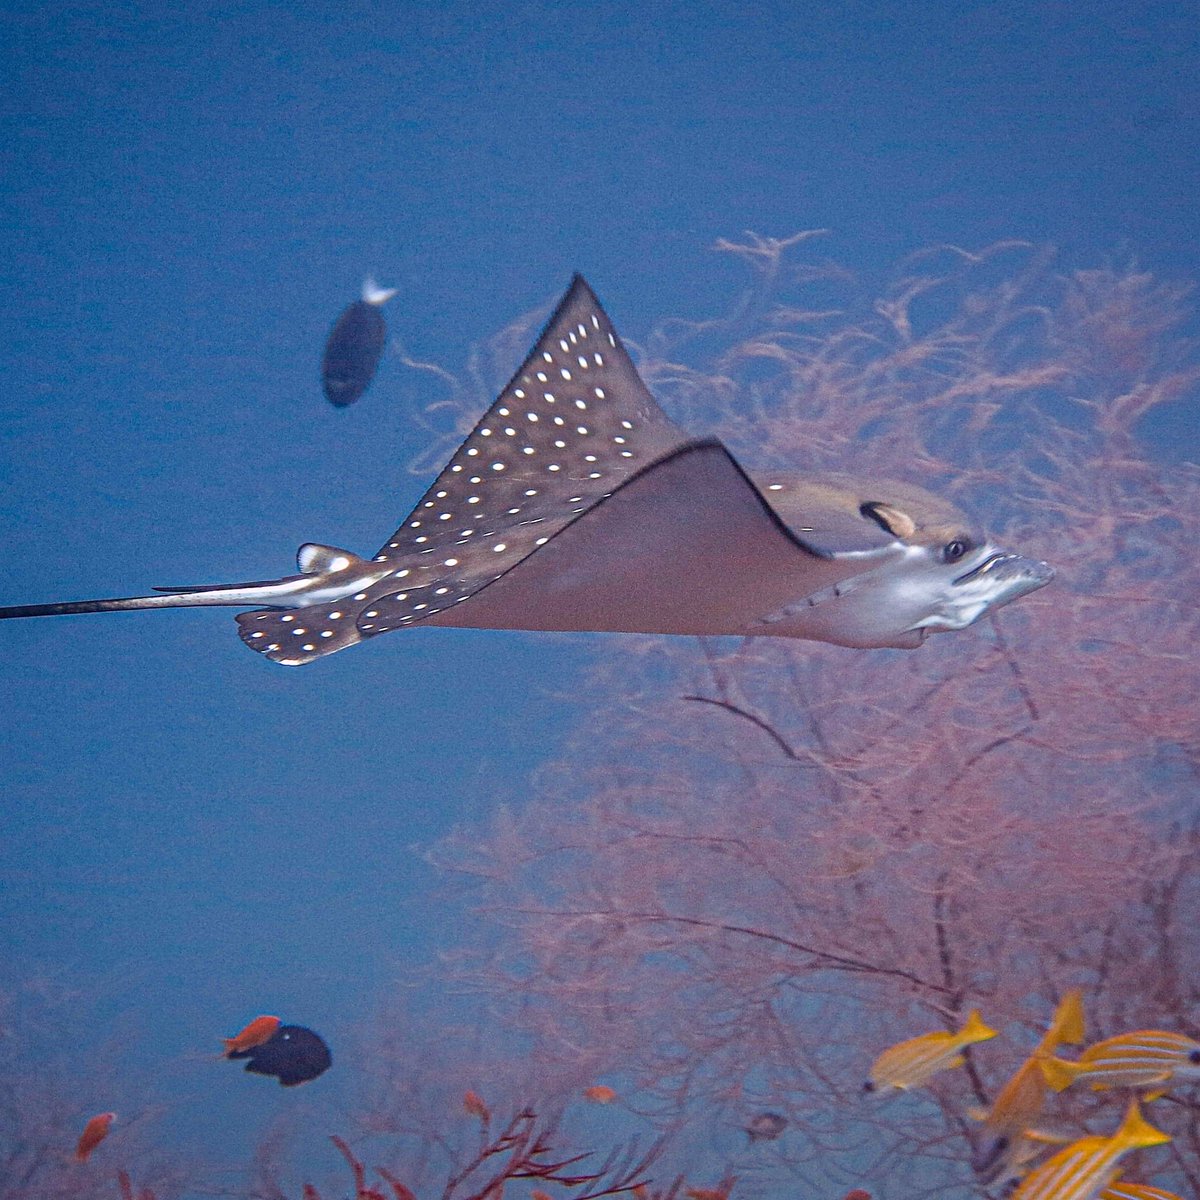 Spotted juvenile eagle ray. The pattern on a spotted eagle ray is unique to each individual.

📷 : @madredeye 
.
.
.
#eagleray #ray #spottedeagleray #juvenile #Maldives #liveaboard #divetravel #traveltheworld #discoverearth #PlanetScubaIndia #oceancreatures #scuba